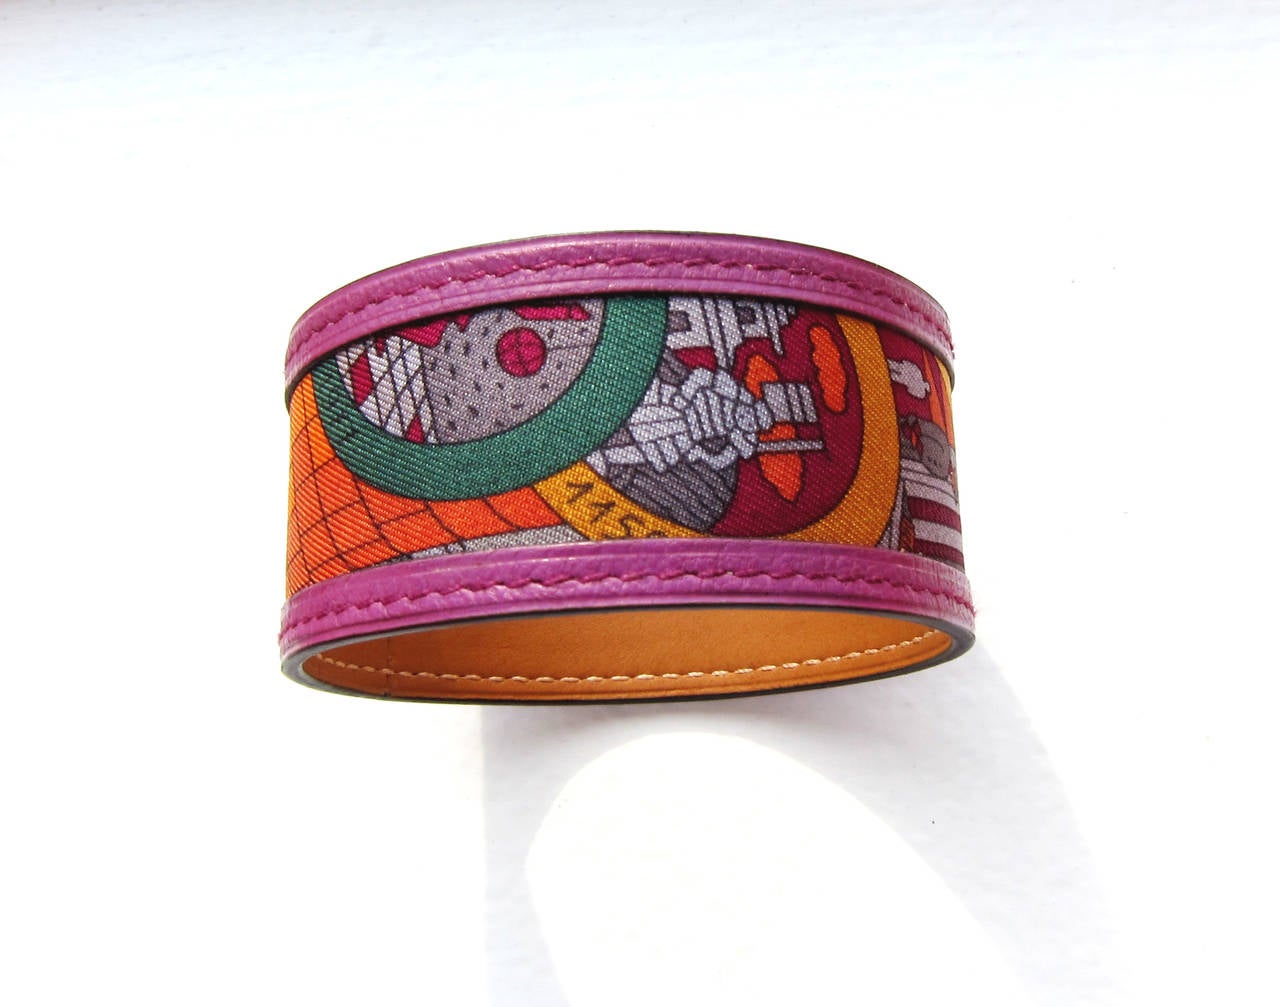 Hermes Petit H Silk Leather Bracelet One of a Kind

World Exclusive from Hermes Petit H Collection
Brand New in Box 
Coming store fresh with Hermes pouch:: box and ribbon
Silk and Leather Bracelet Petit H Bracelet
Standard size 65mm inside